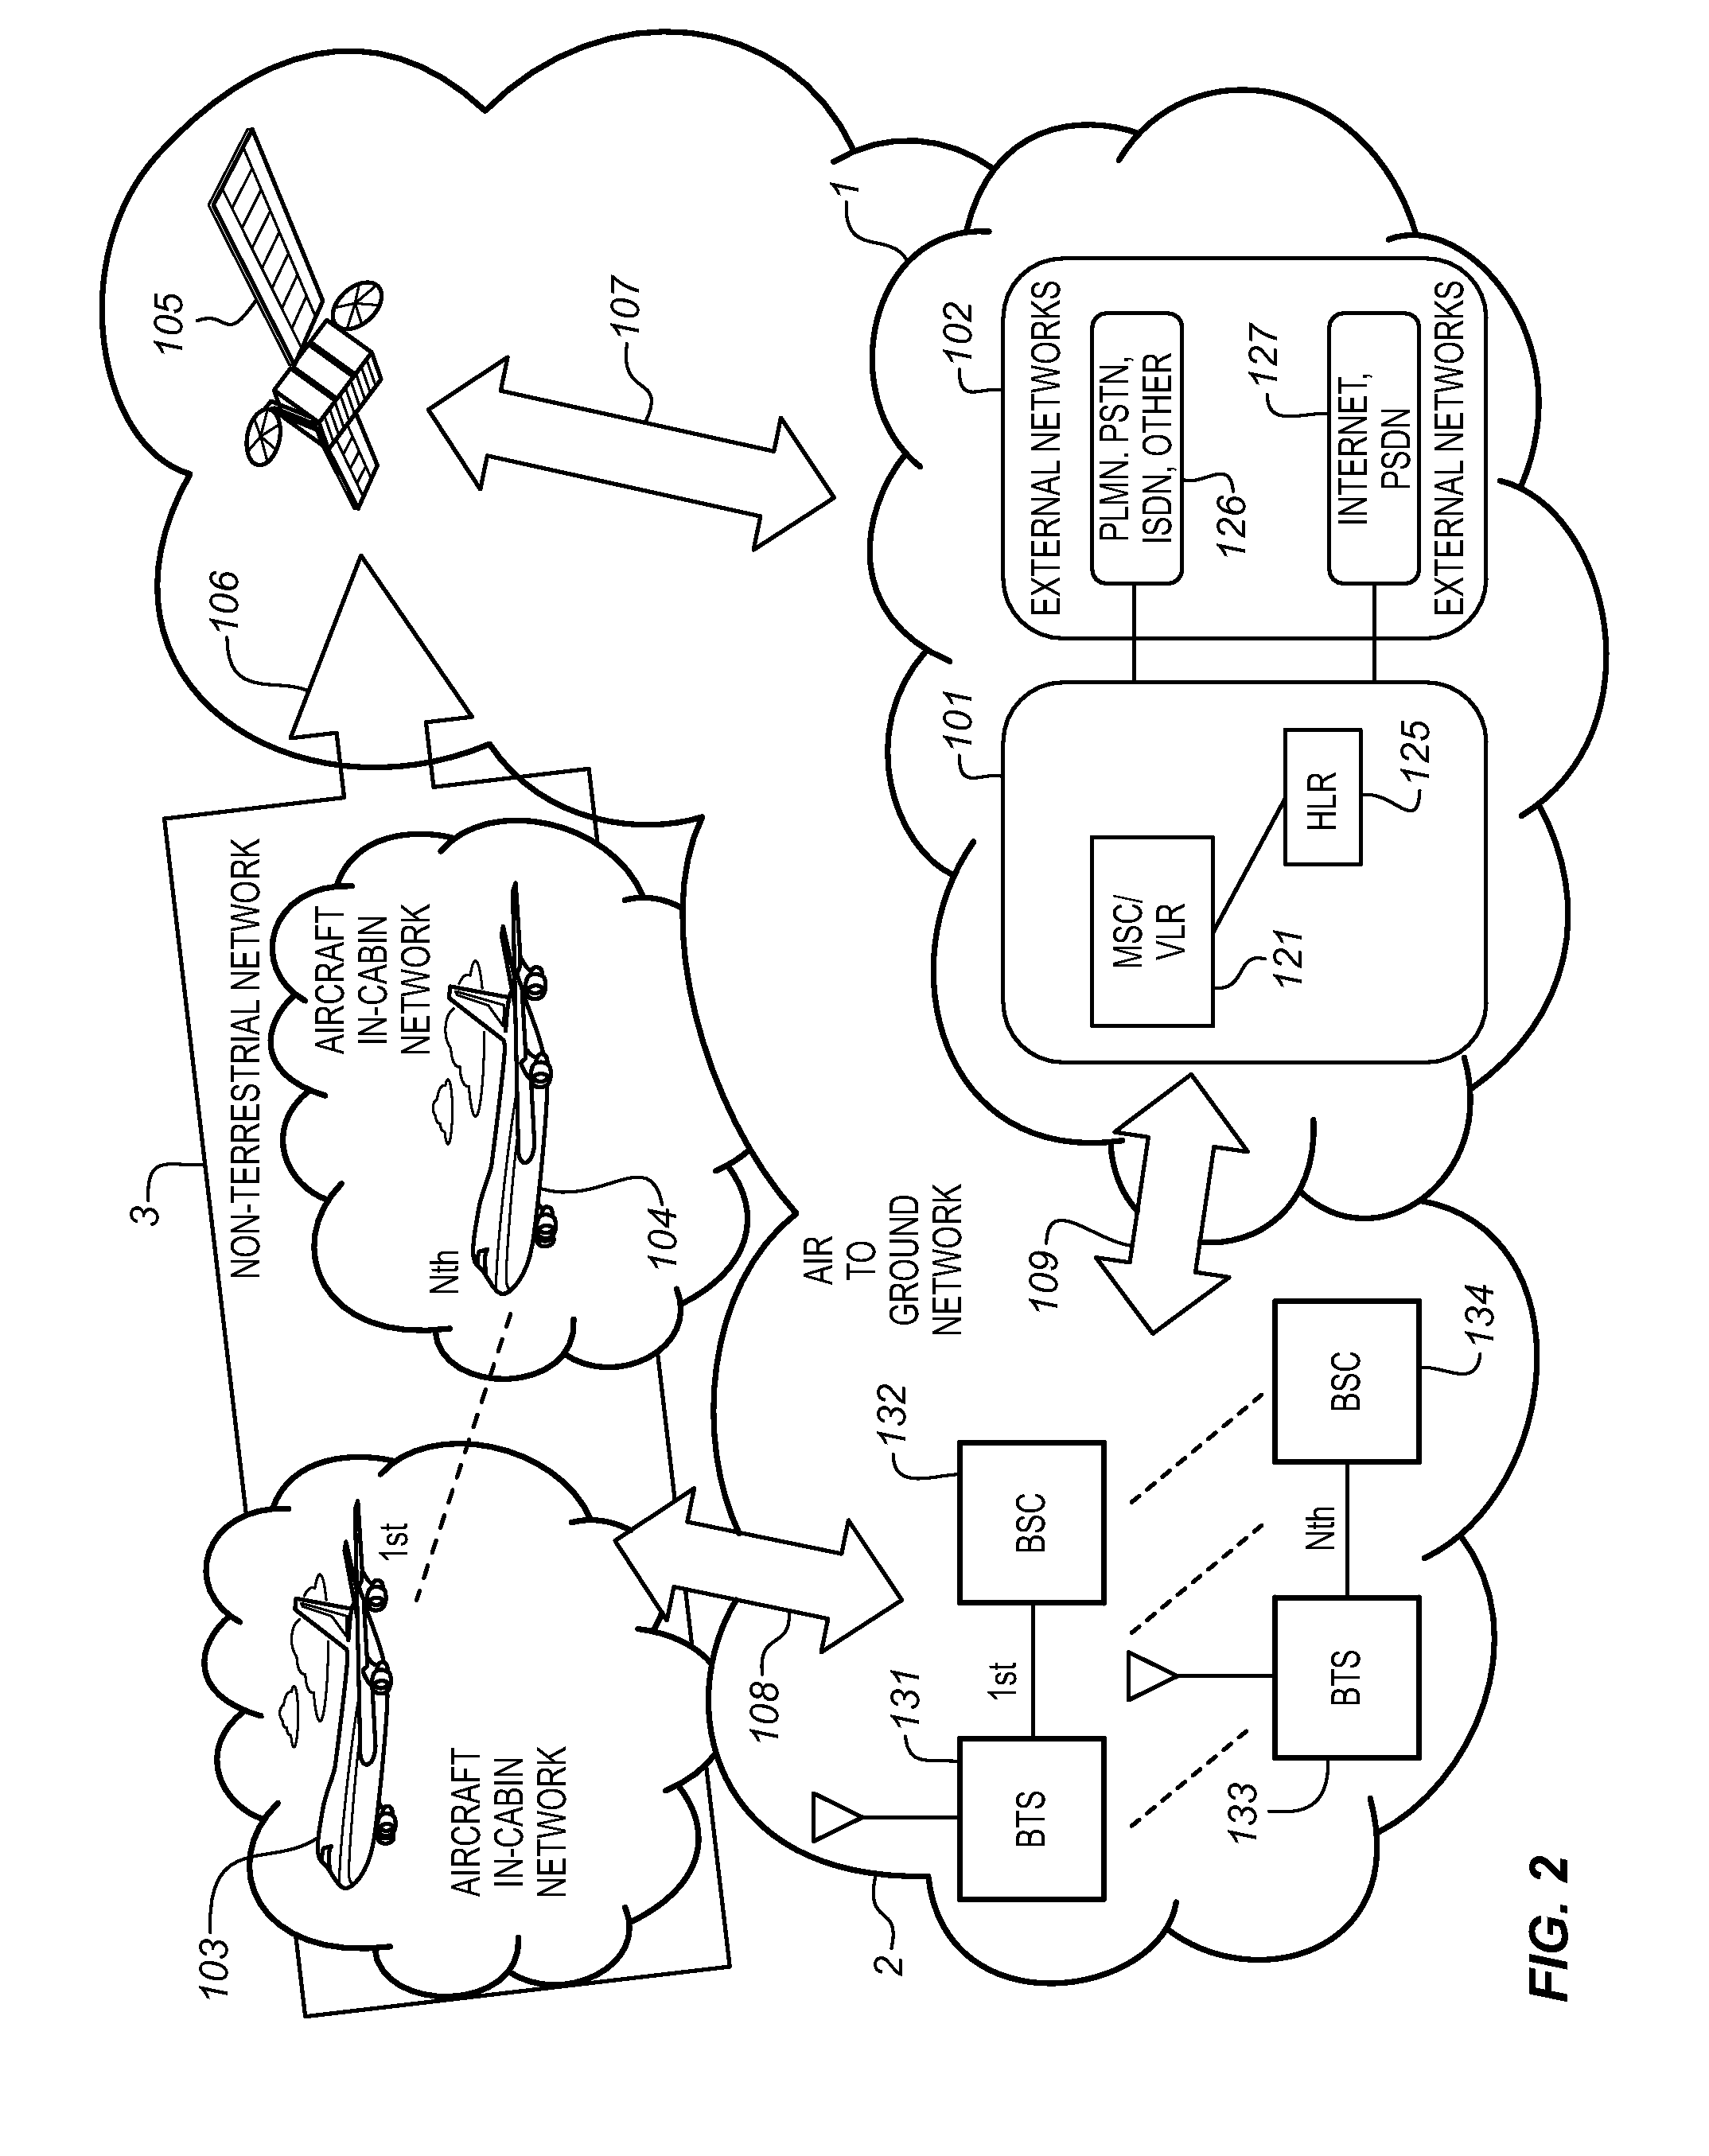 System for providing high speed communications service in an airborne wireless cellular network